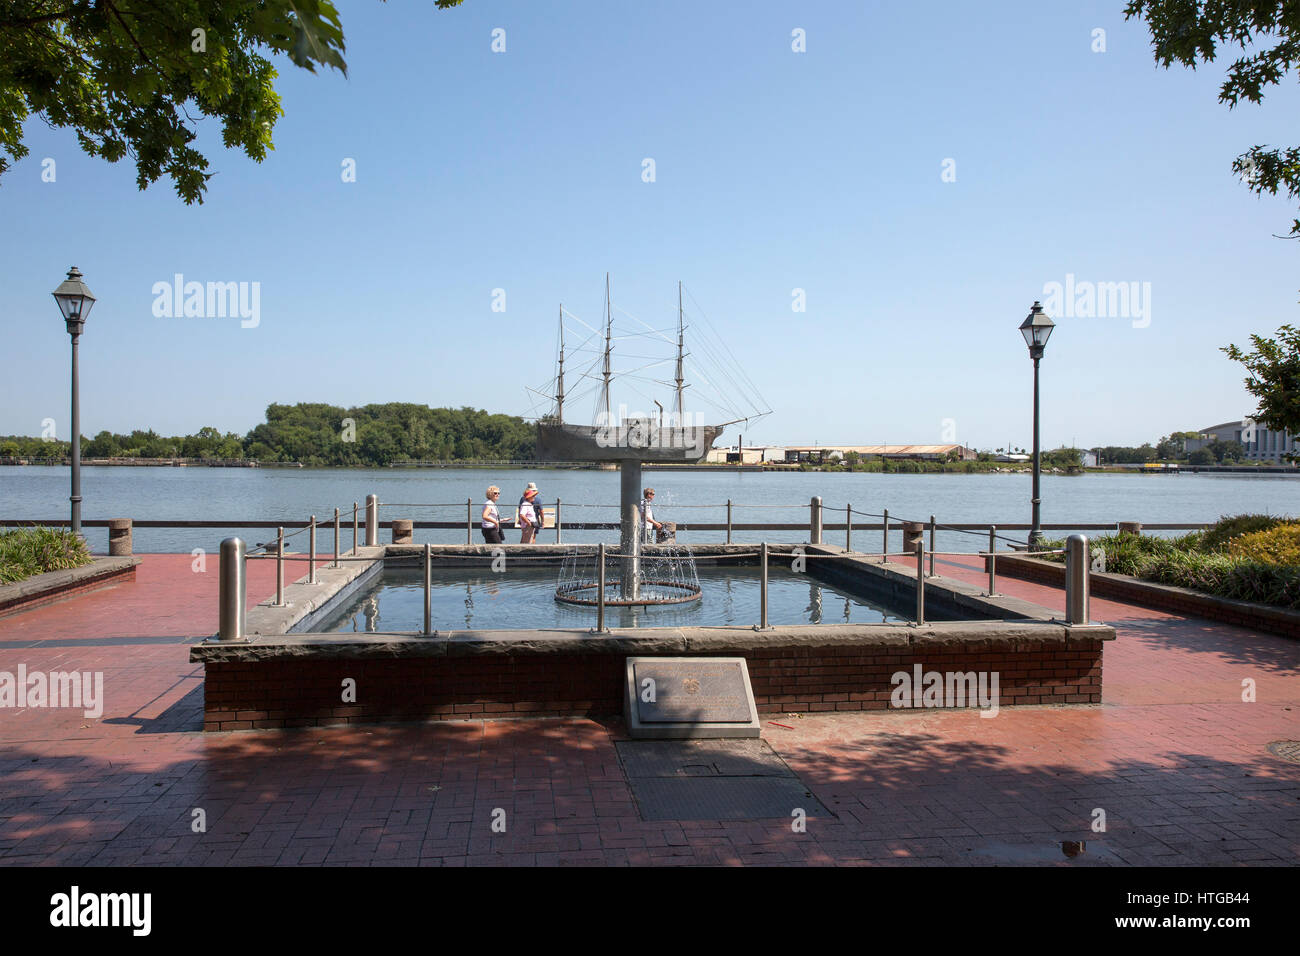 Monument to the various important ships named after the city Savannah.  The steamship Savannah is modeled, river in the background Stock Photo